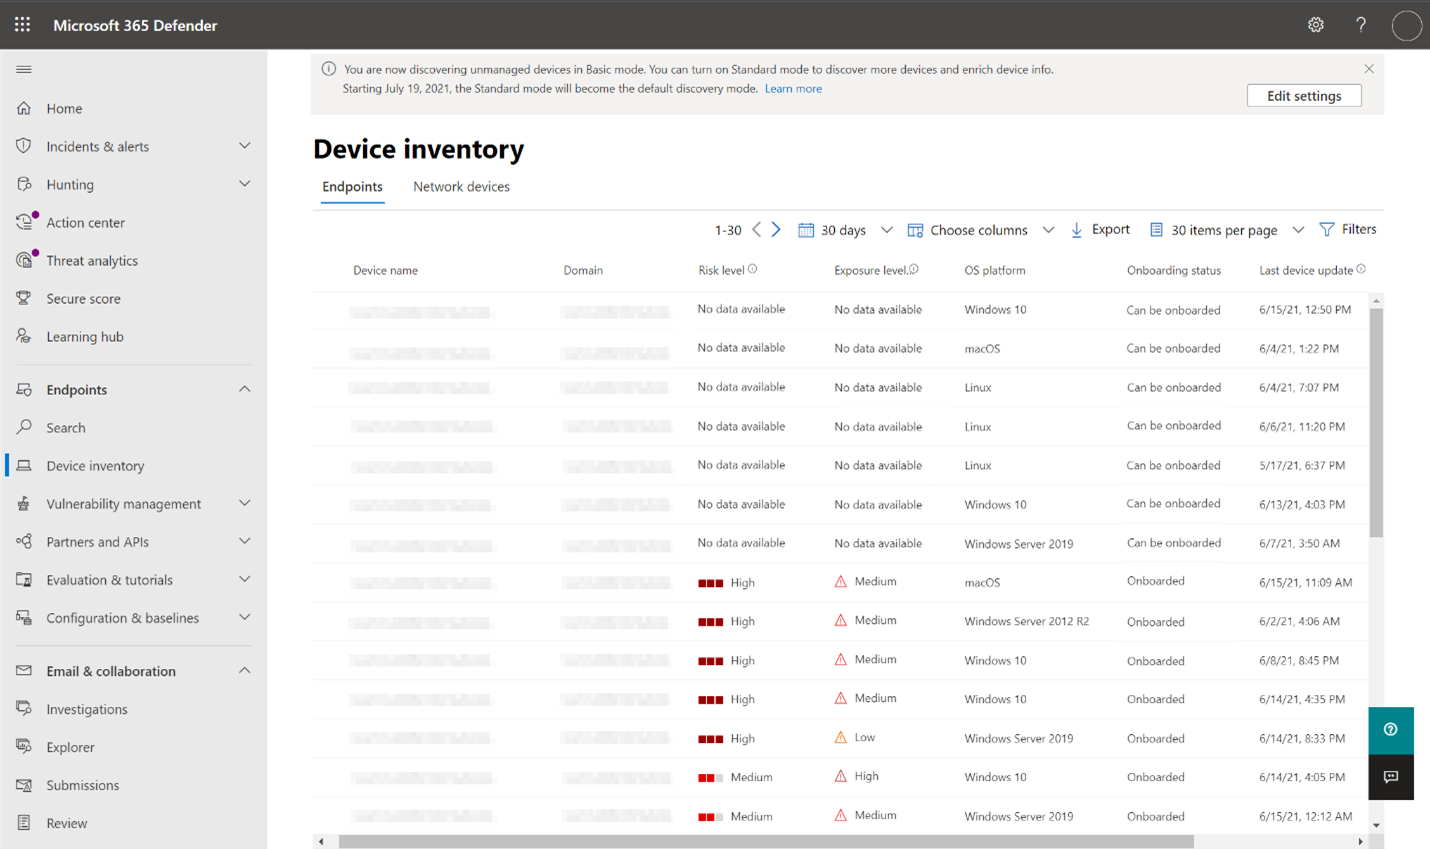 Screenshot of Microsoft 365 Defender showing Device inventory